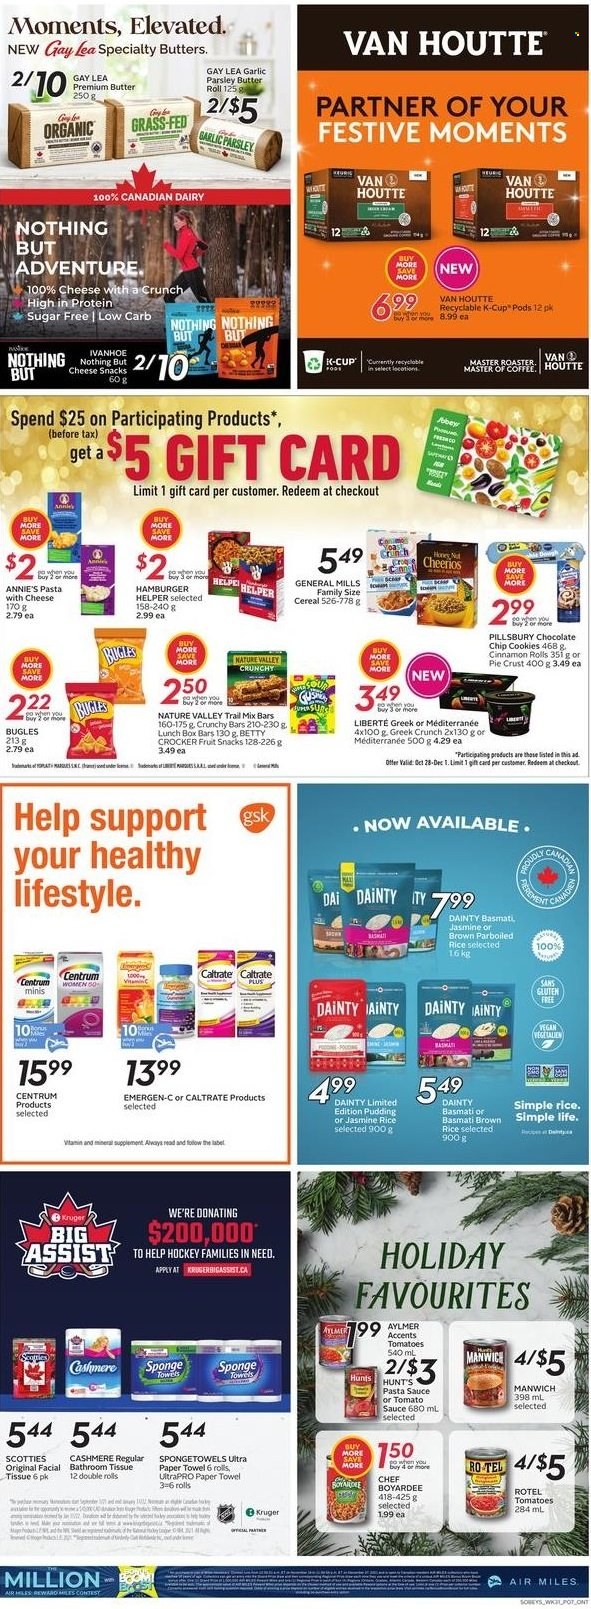 thumbnail - Sobeys Flyer - November 25, 2021 - December 01, 2021 - Sales products - cinnamon roll, garlic, parsley, pasta sauce, Pillsbury, Annie's, cheese, pudding, butter, cookies, fruit snack, pie crust, tomato sauce, Manwich, Chef Boyardee, cereals, Cheerios, Nature Valley, basmati rice, rice, jasmine rice, trail mix, coffee capsules, K-Cups, bath tissue, paper towels, Moments, vitamin c, Emergen-C, Centrum. Page 8.